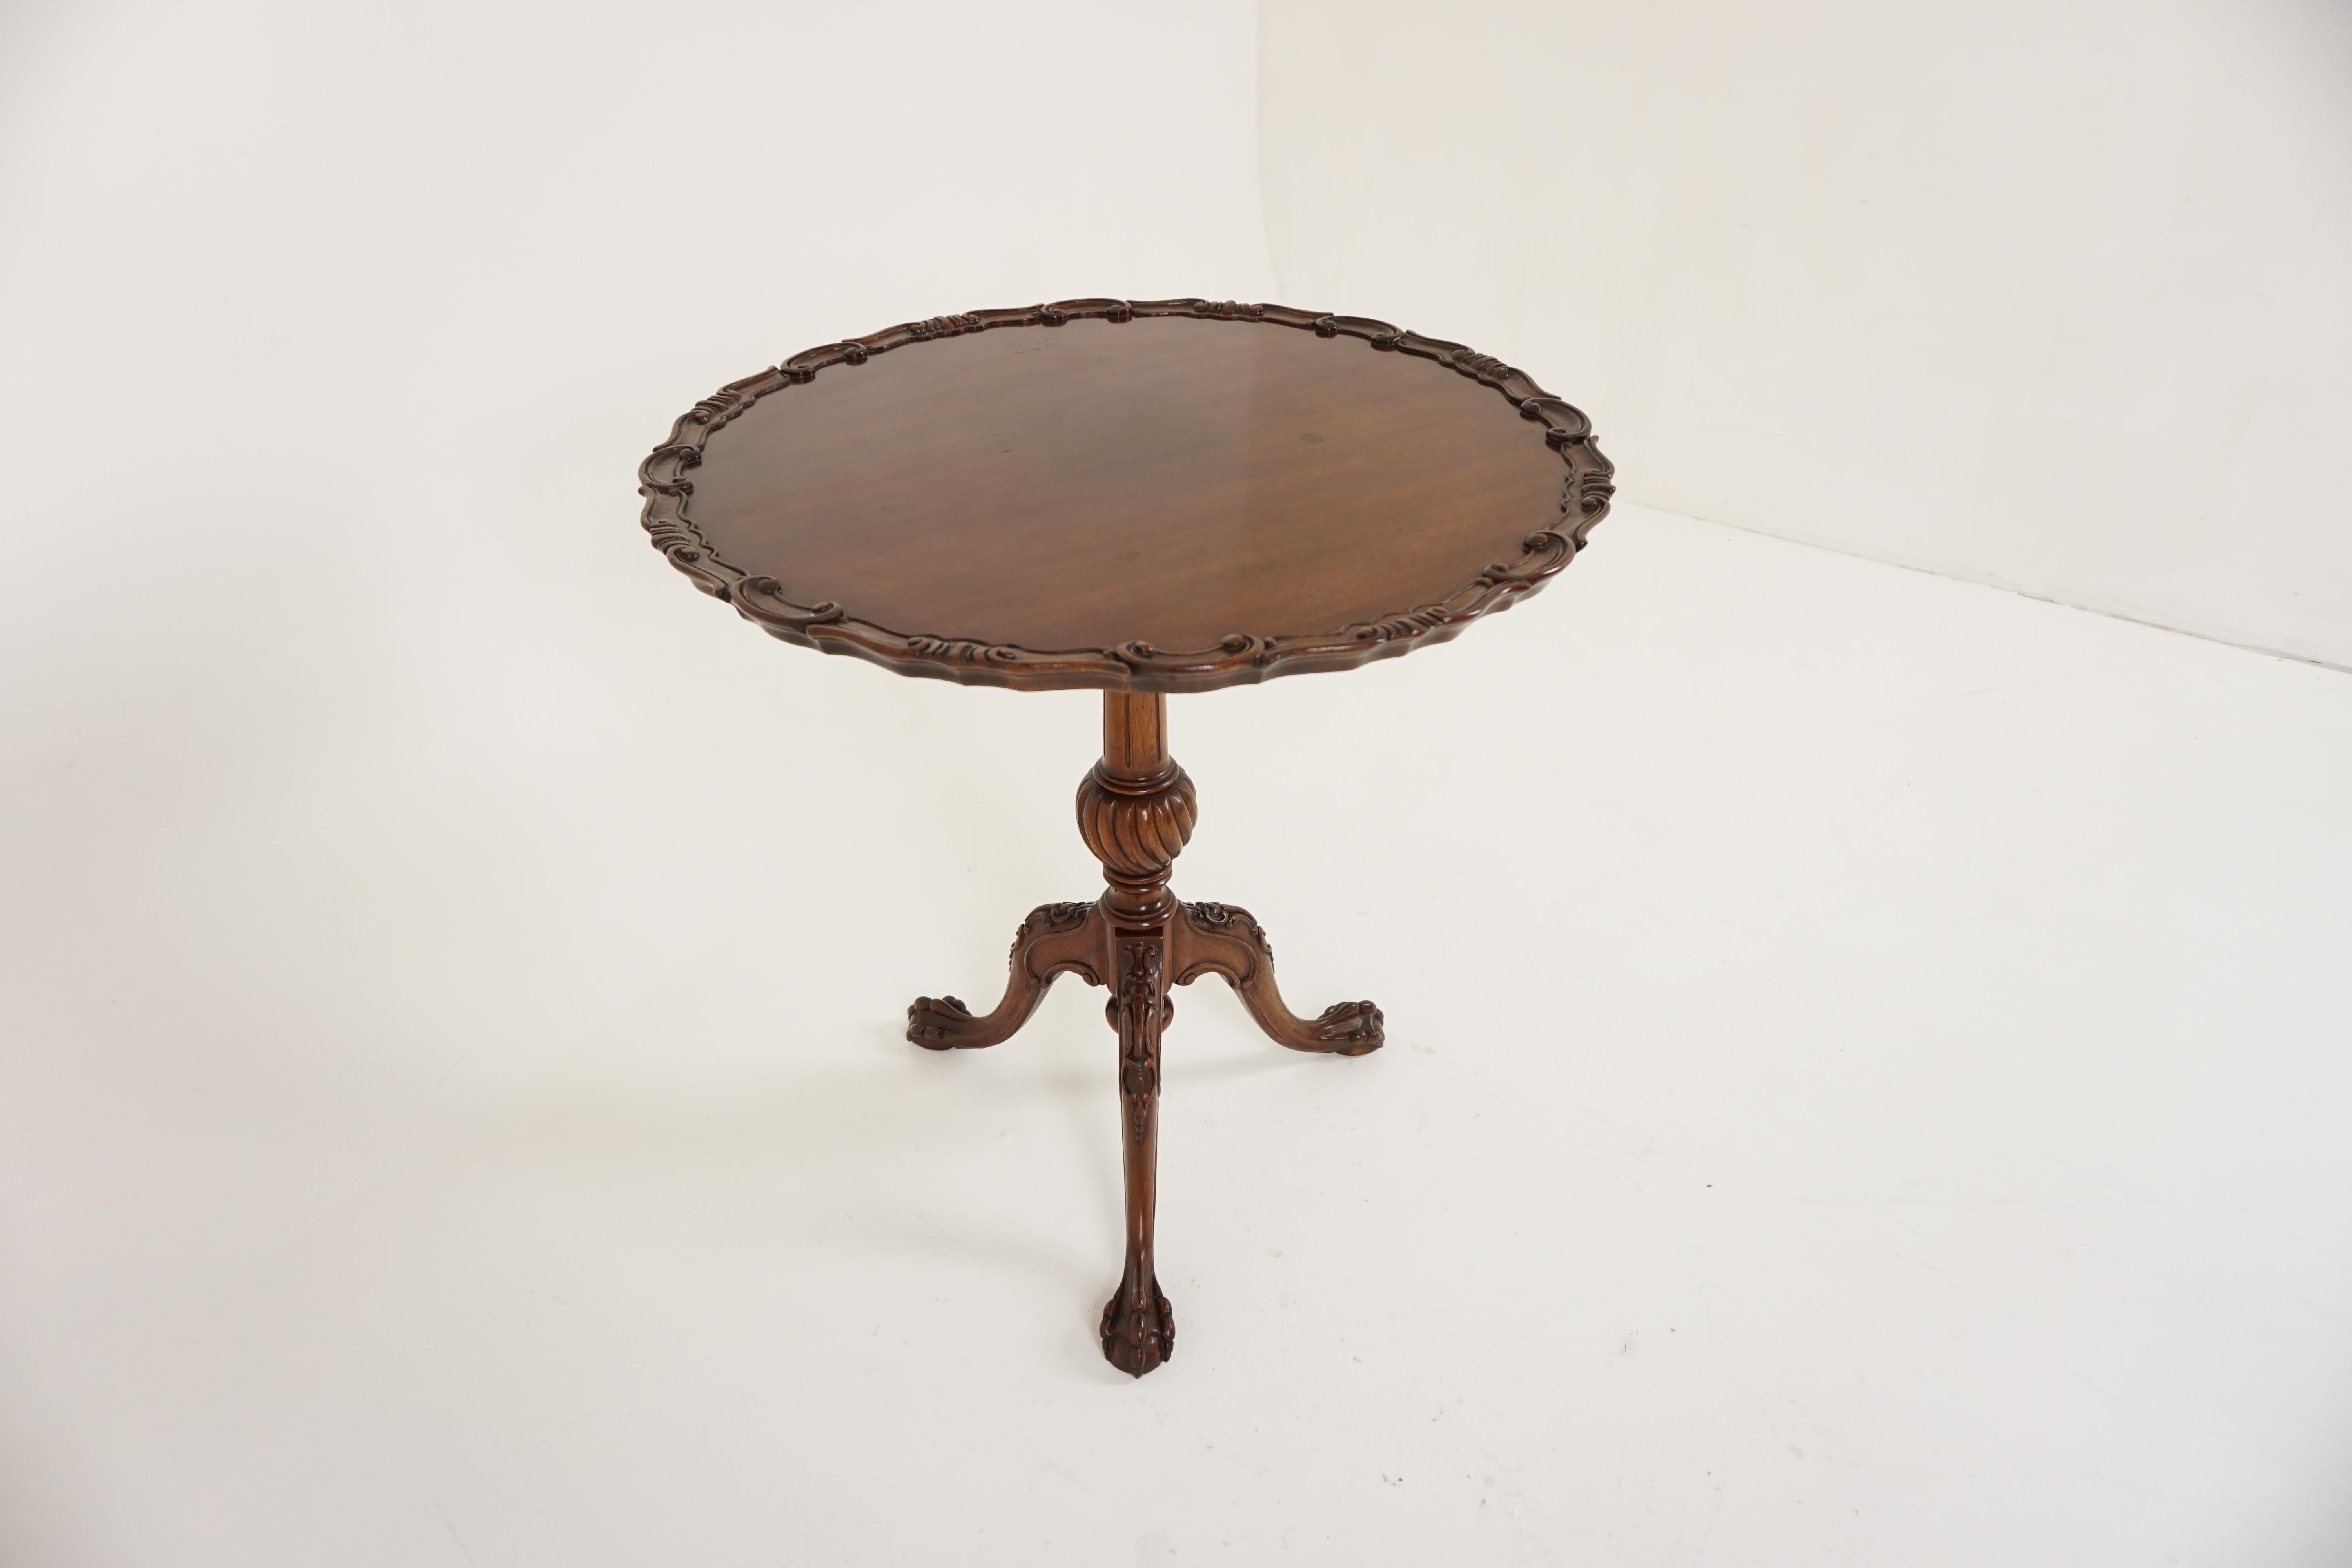 Vintage walnut circular carved tilt-table, Scotland, 1920, B2053

Scotland 1920
Solid walnut
Original finish
Beautiful circular top with pie crust edge
Standing on a carved post
Connecting to three heavily carved feet underneath
Tilt top